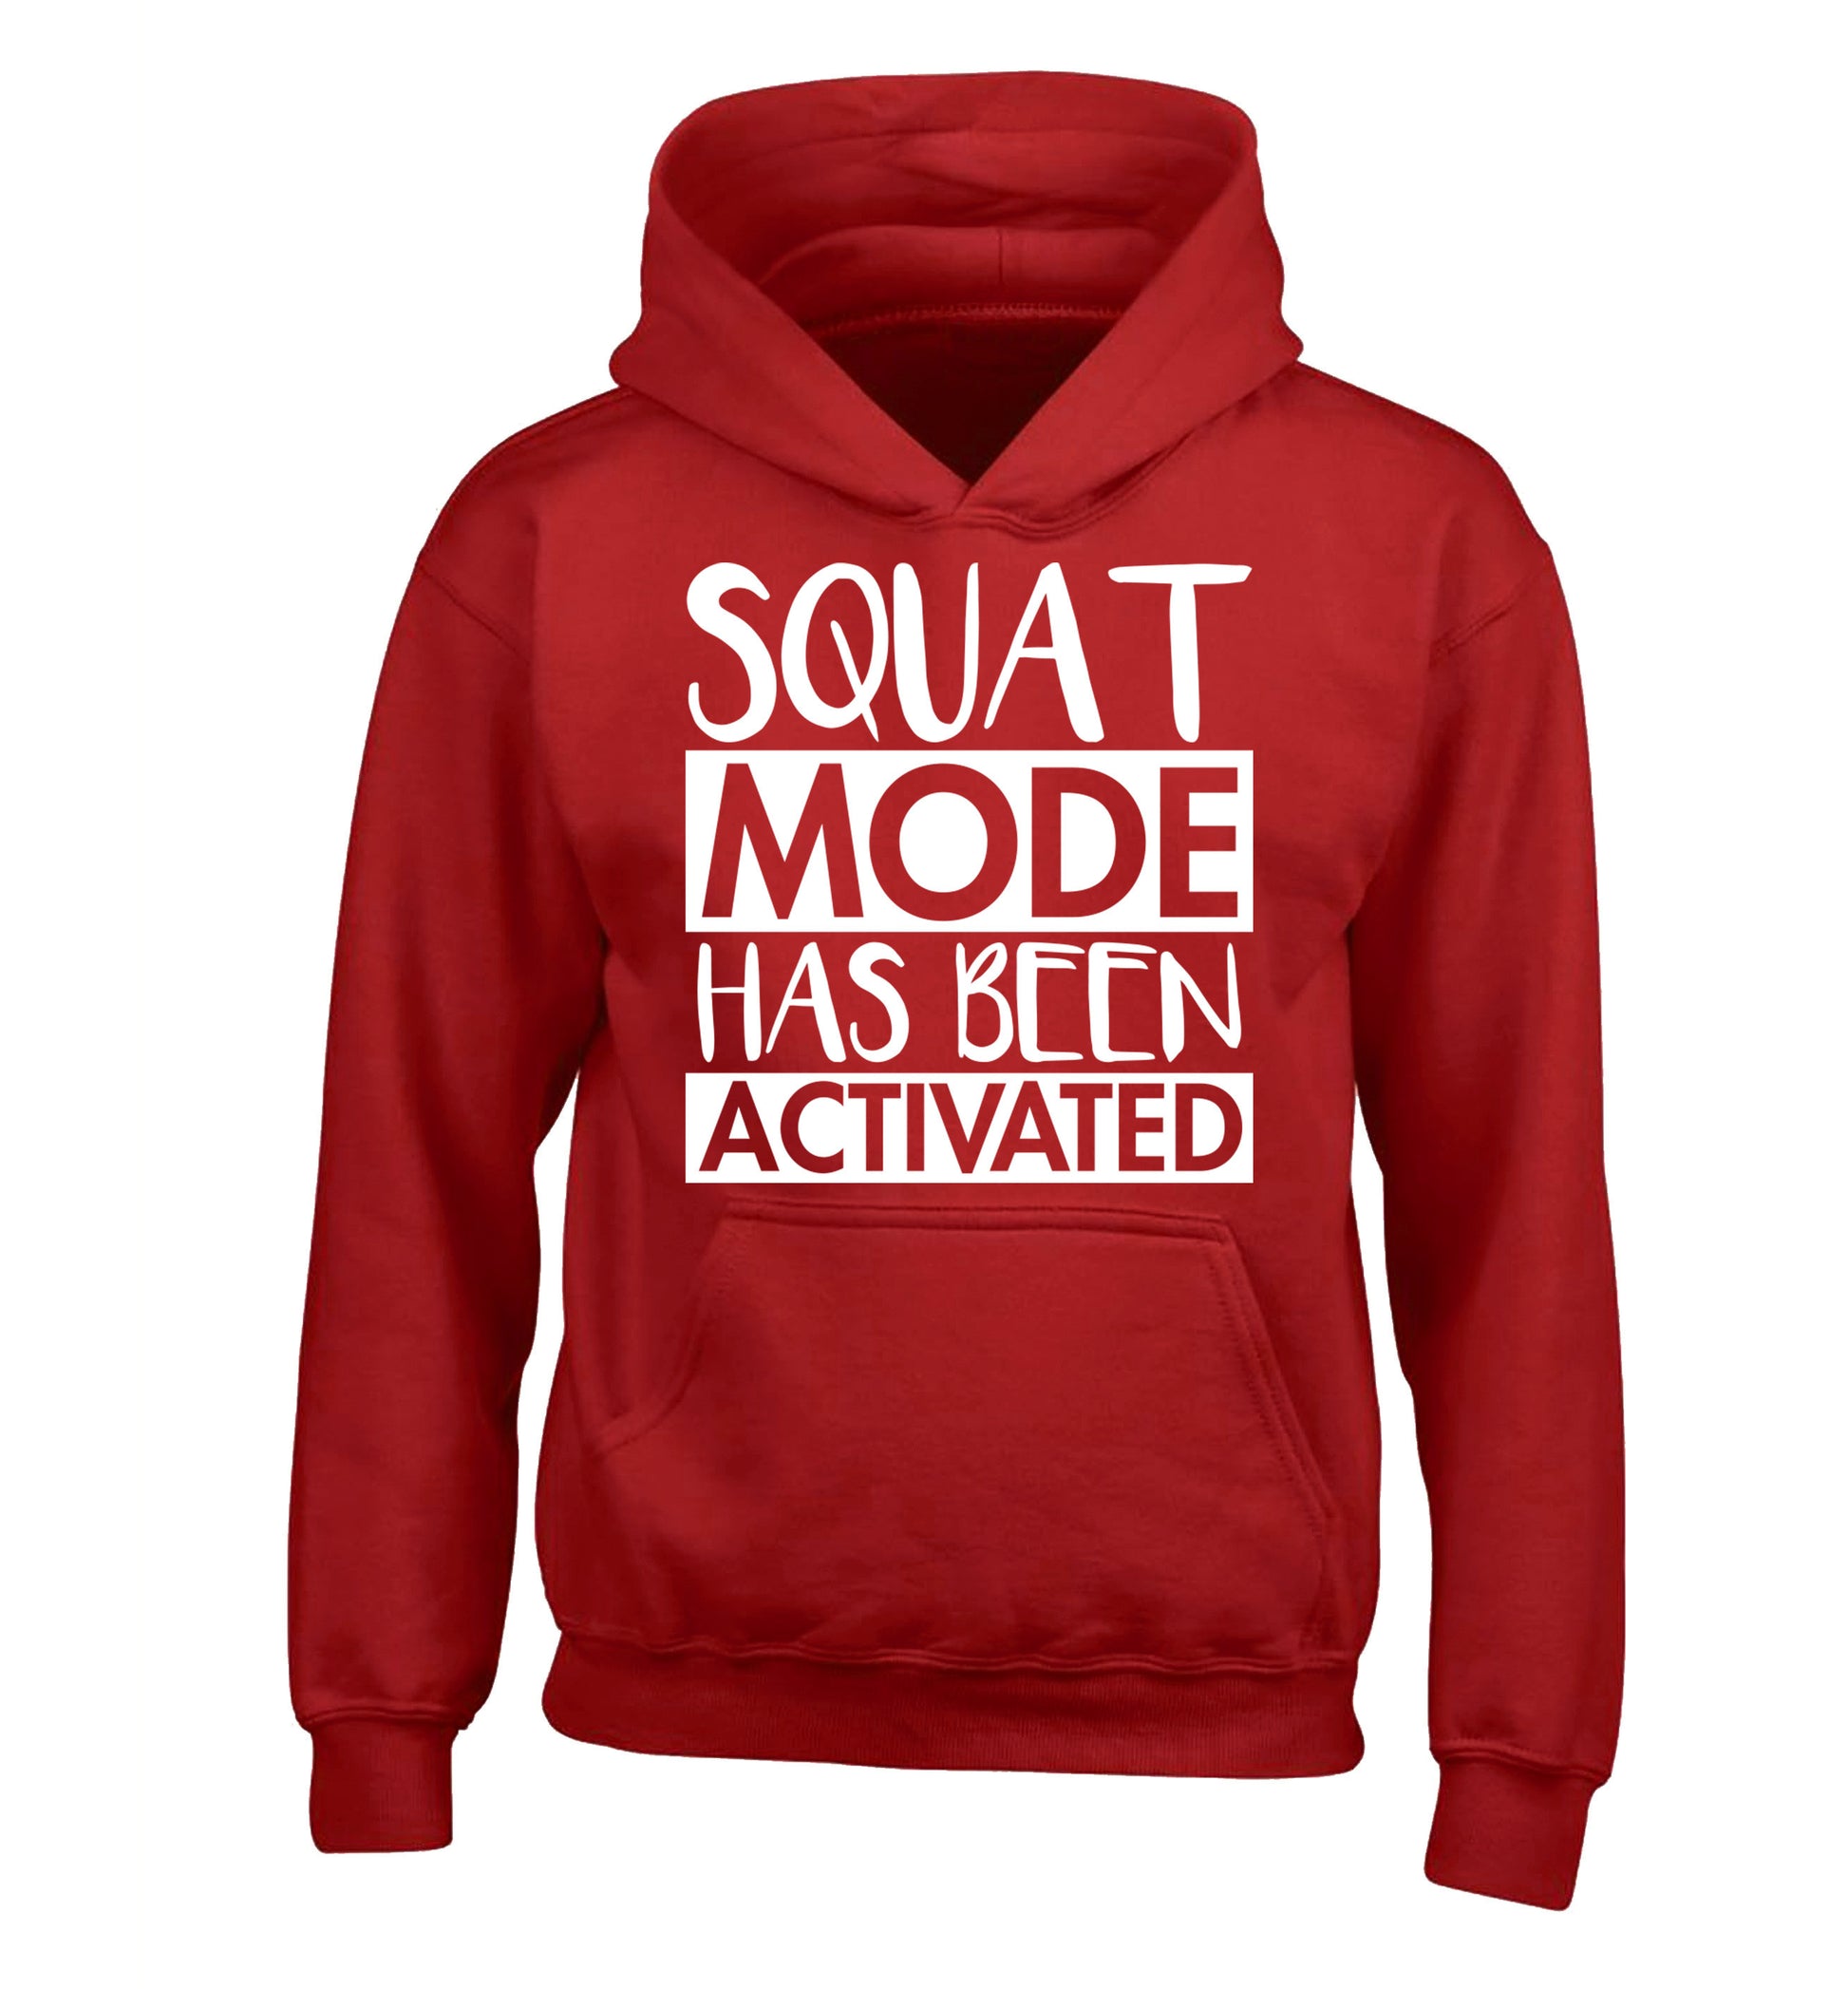 Squat mode activated children's red hoodie 12-14 Years